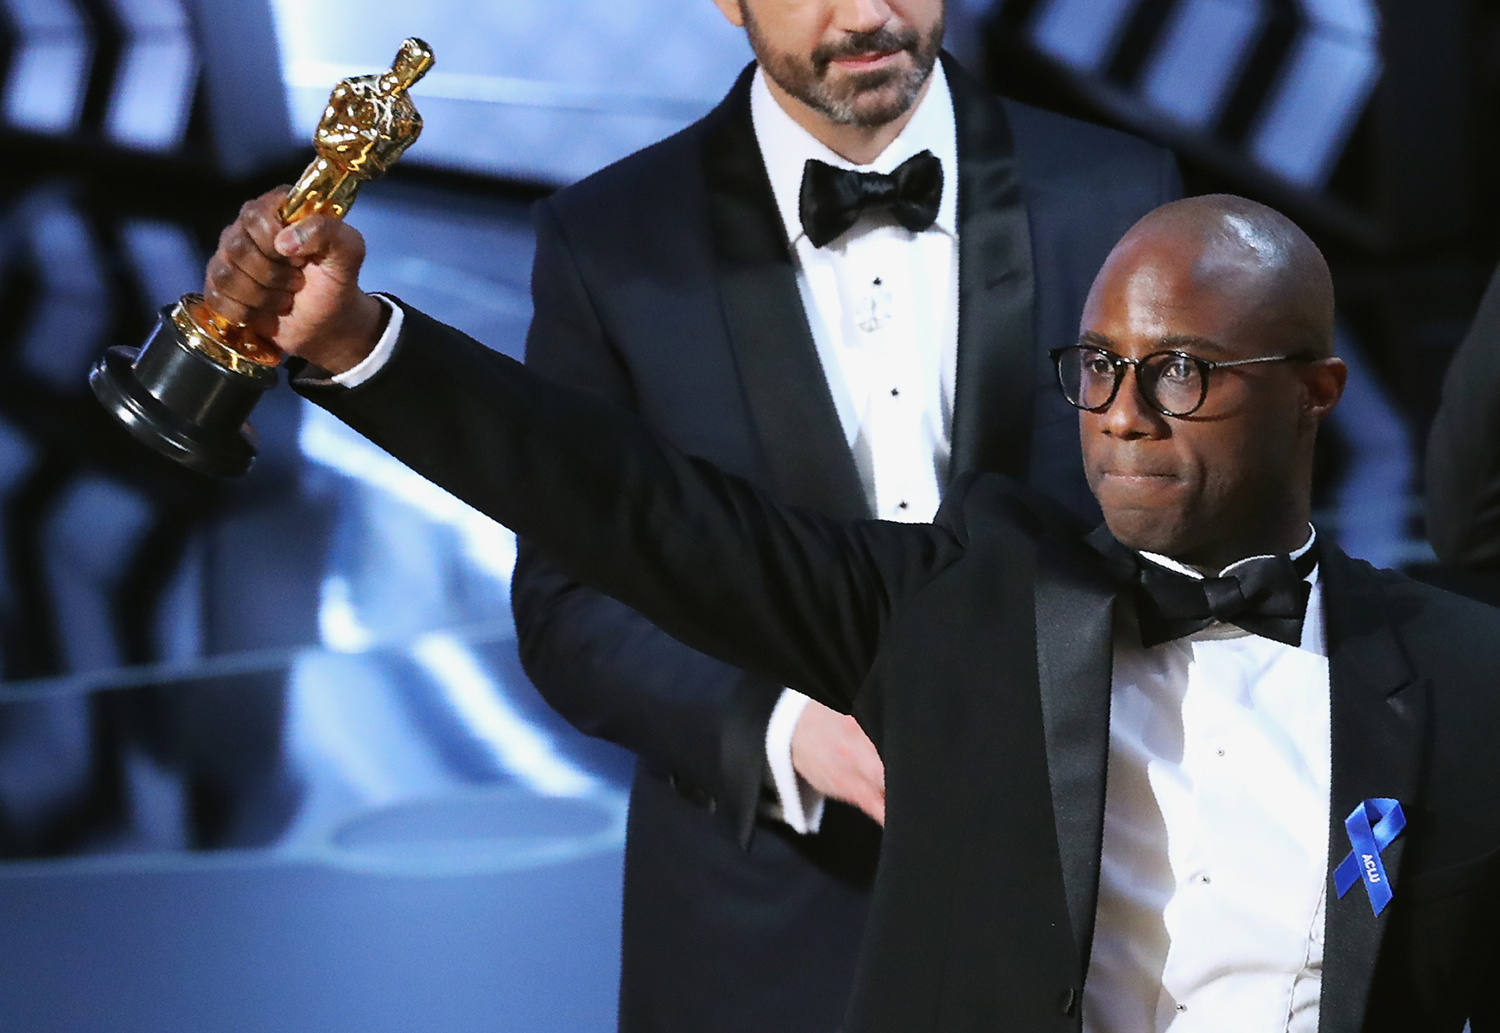 Los Angeles 2017-02-27 89th Academy Awards - Oscars Awards Show - Hollywood, California, U.S. - 26/02/17 - Director Barry Jenkins holds the Oscar as Moonlight wins Best Picture. REUTERS/Lucy Nicholson TPX IMAGES OF THE DAY Photo: / REUTERS / TT / kod 72000